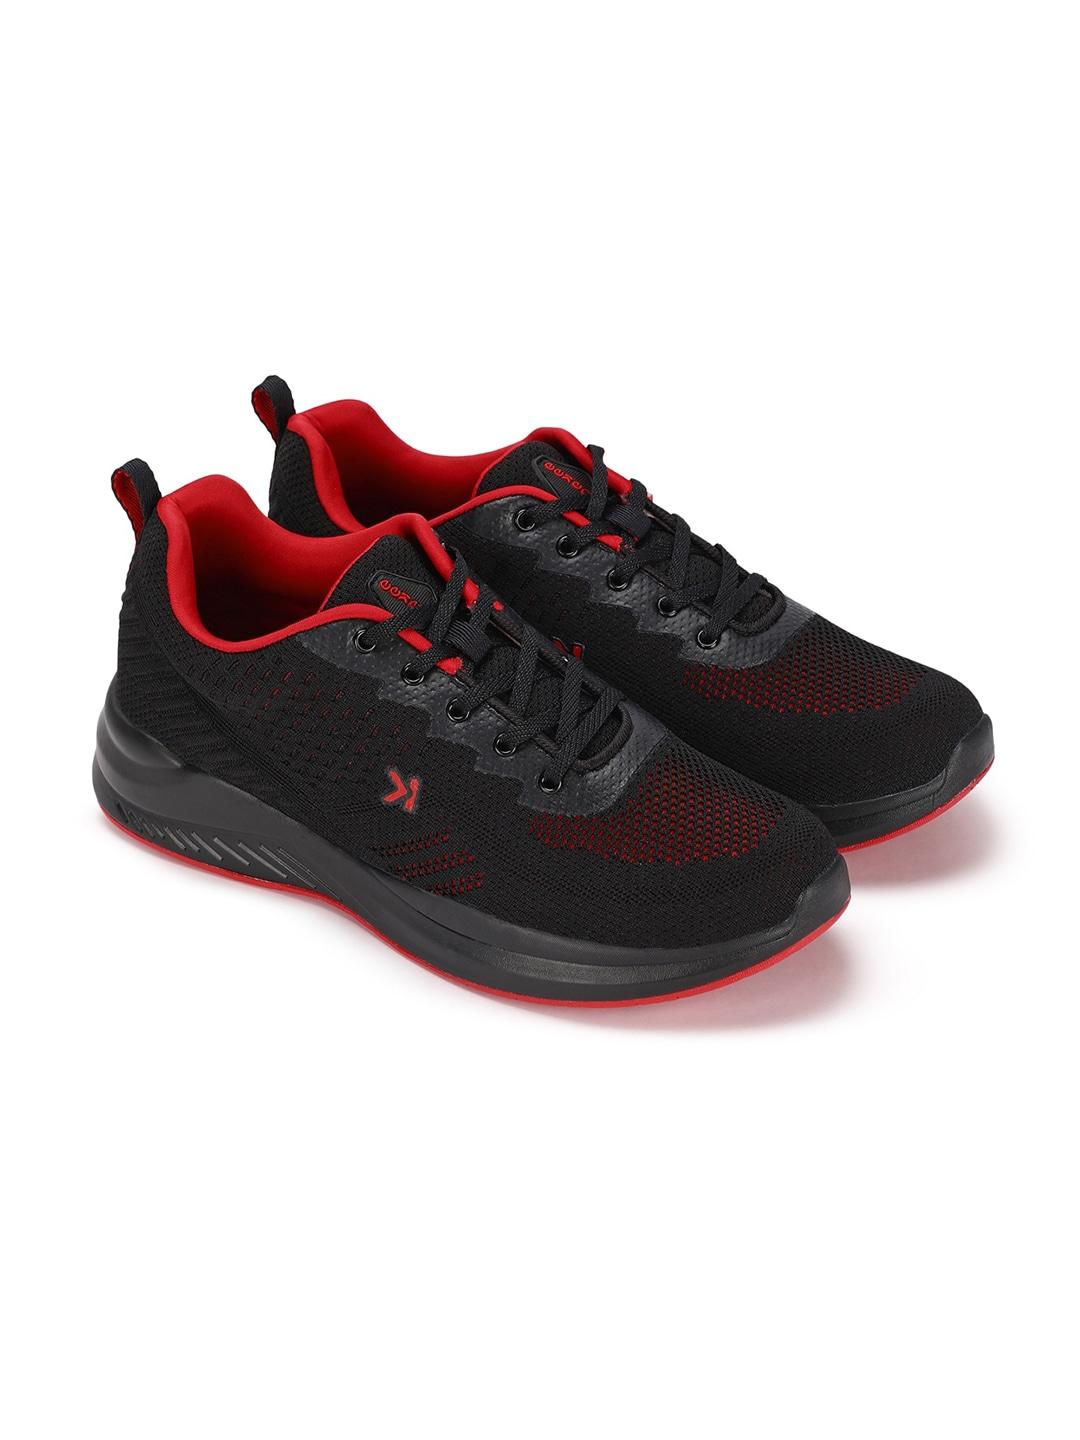 Paragon Men Textured Cushioned Insole Lace-Up Sneakers